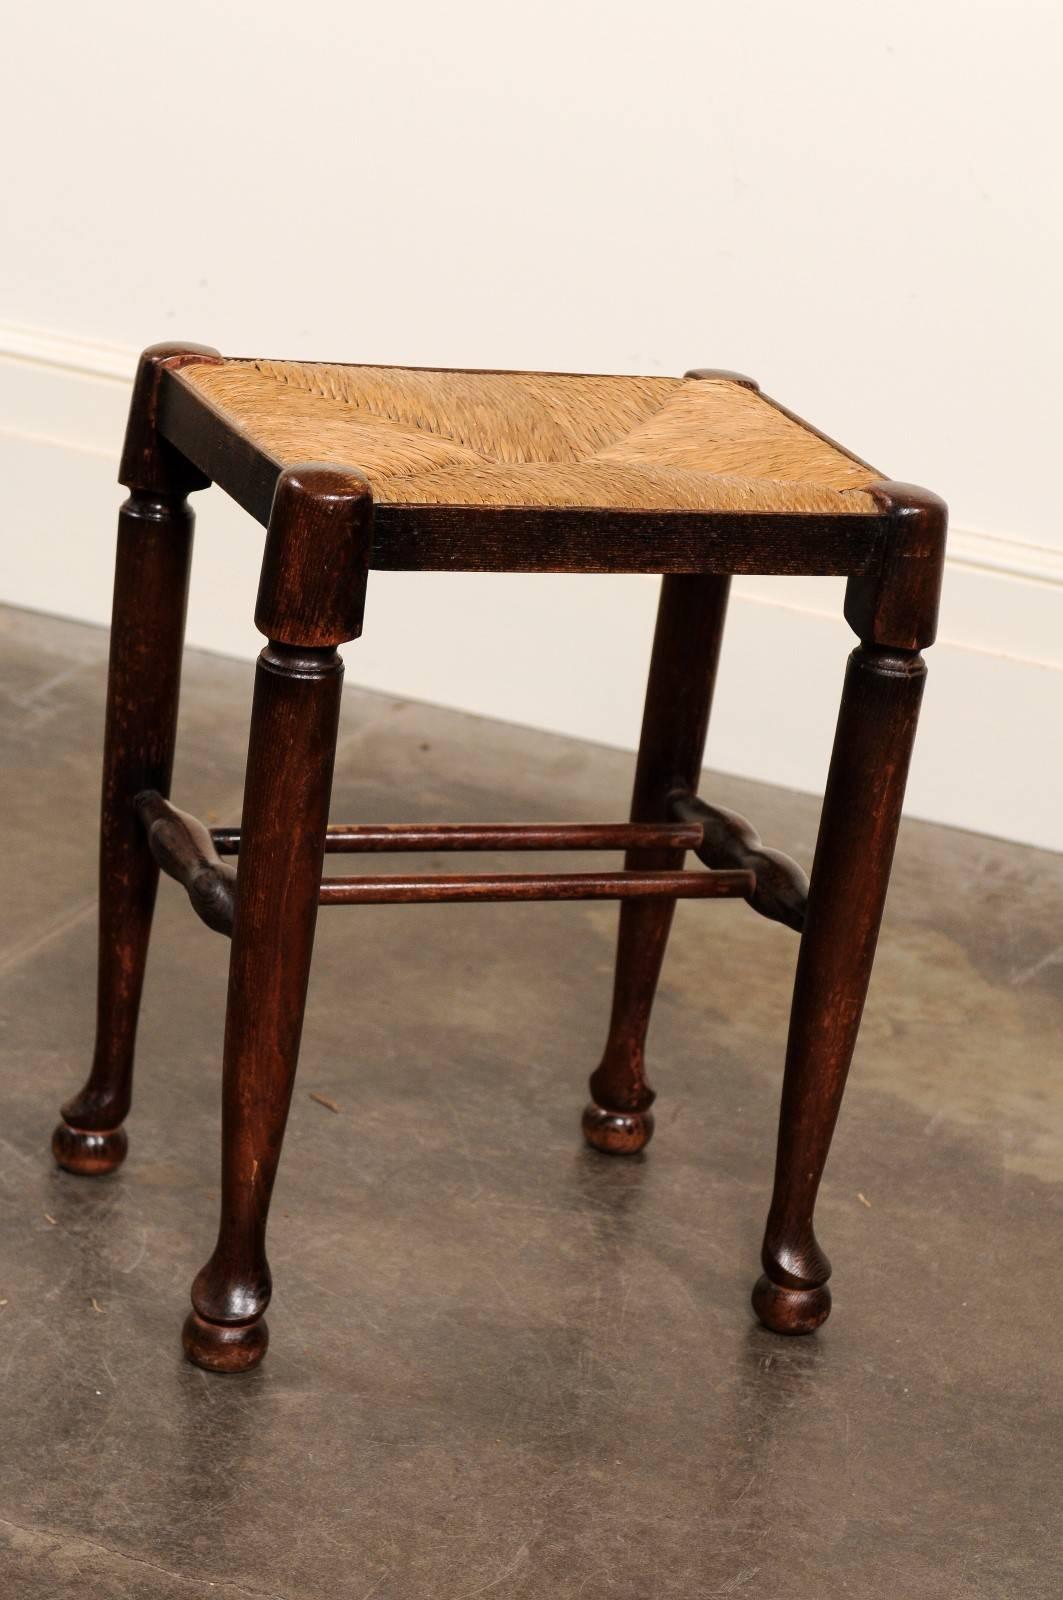 This English oak stool from the late 19th century features a rectangular rush seat over four sleek legs with spade ends raised on ball feet, secured with an original double cross stretcher. The beautiful rich patina, combined to the simplicity of